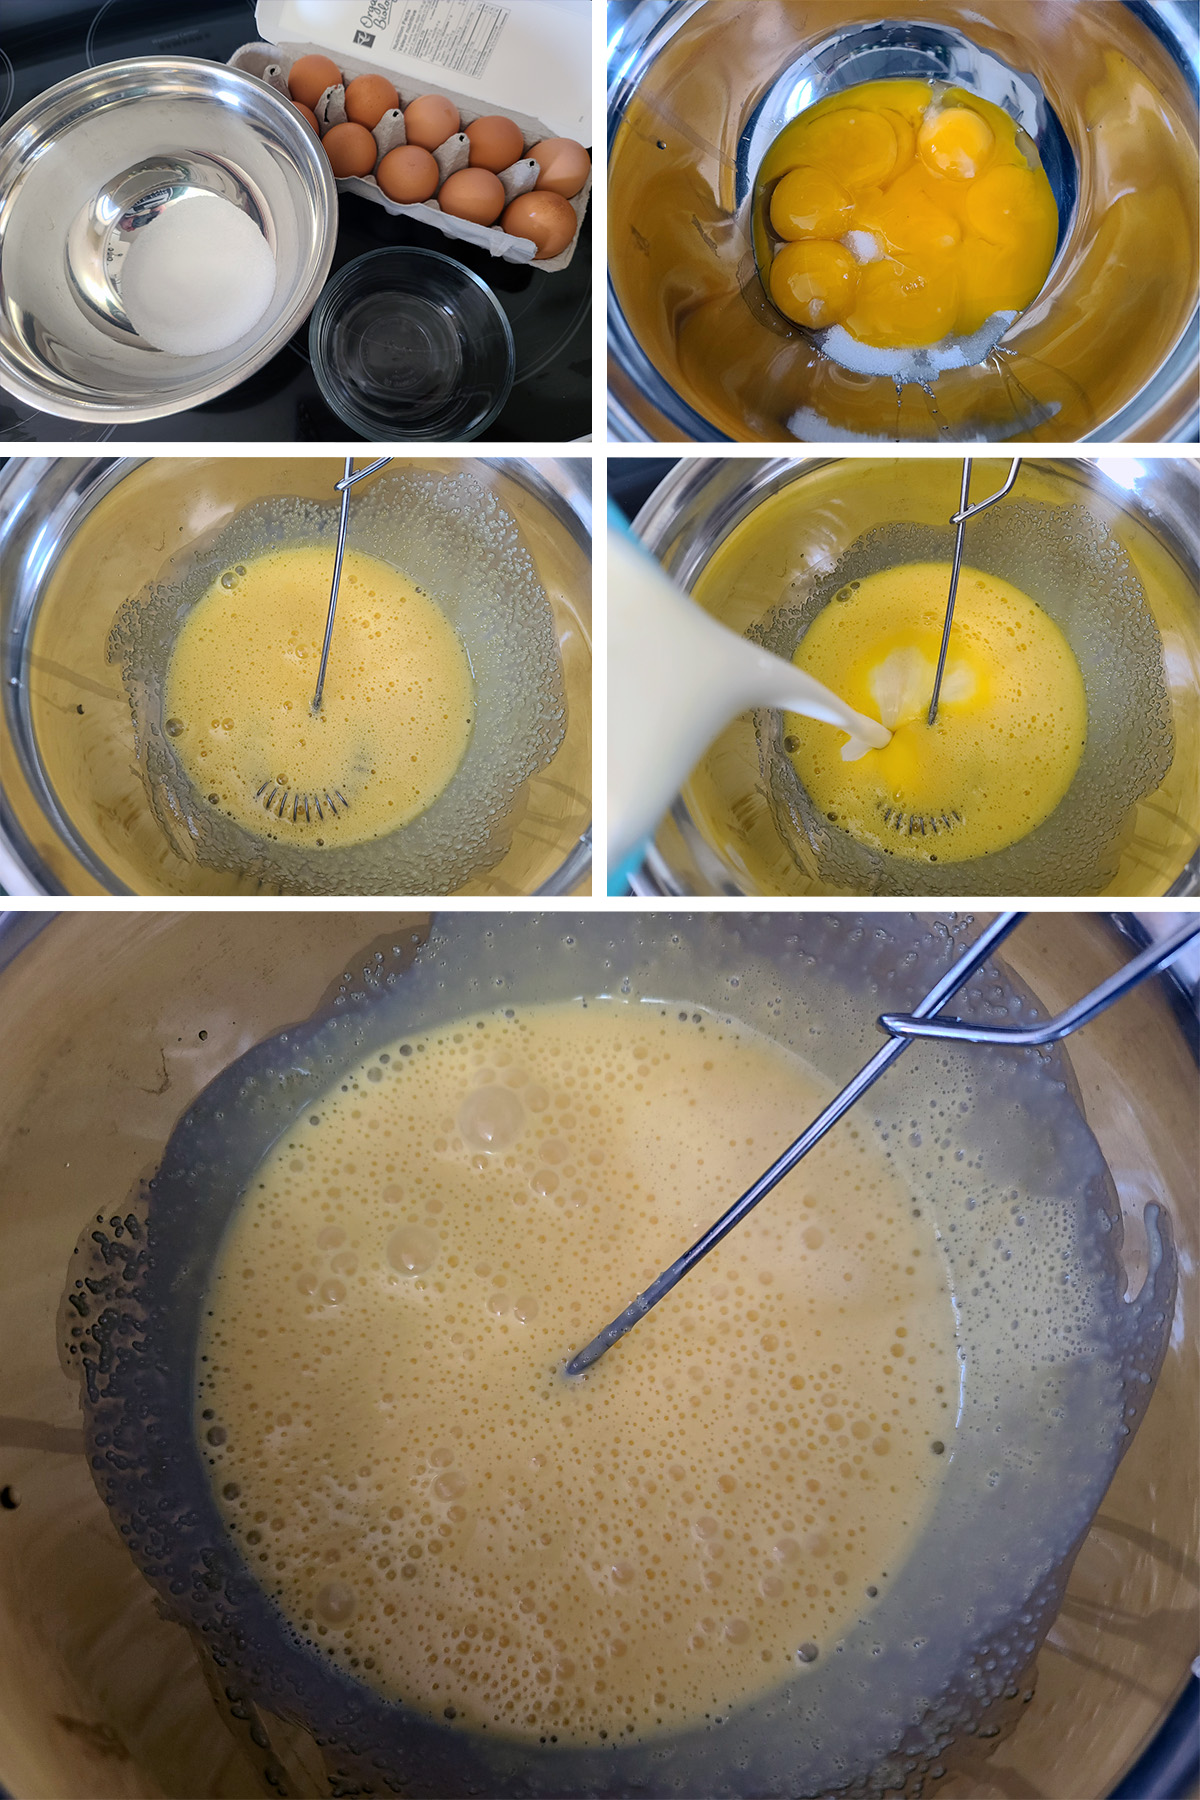 Egg yolks, sugar substitute, and heavy cream being mixed together.